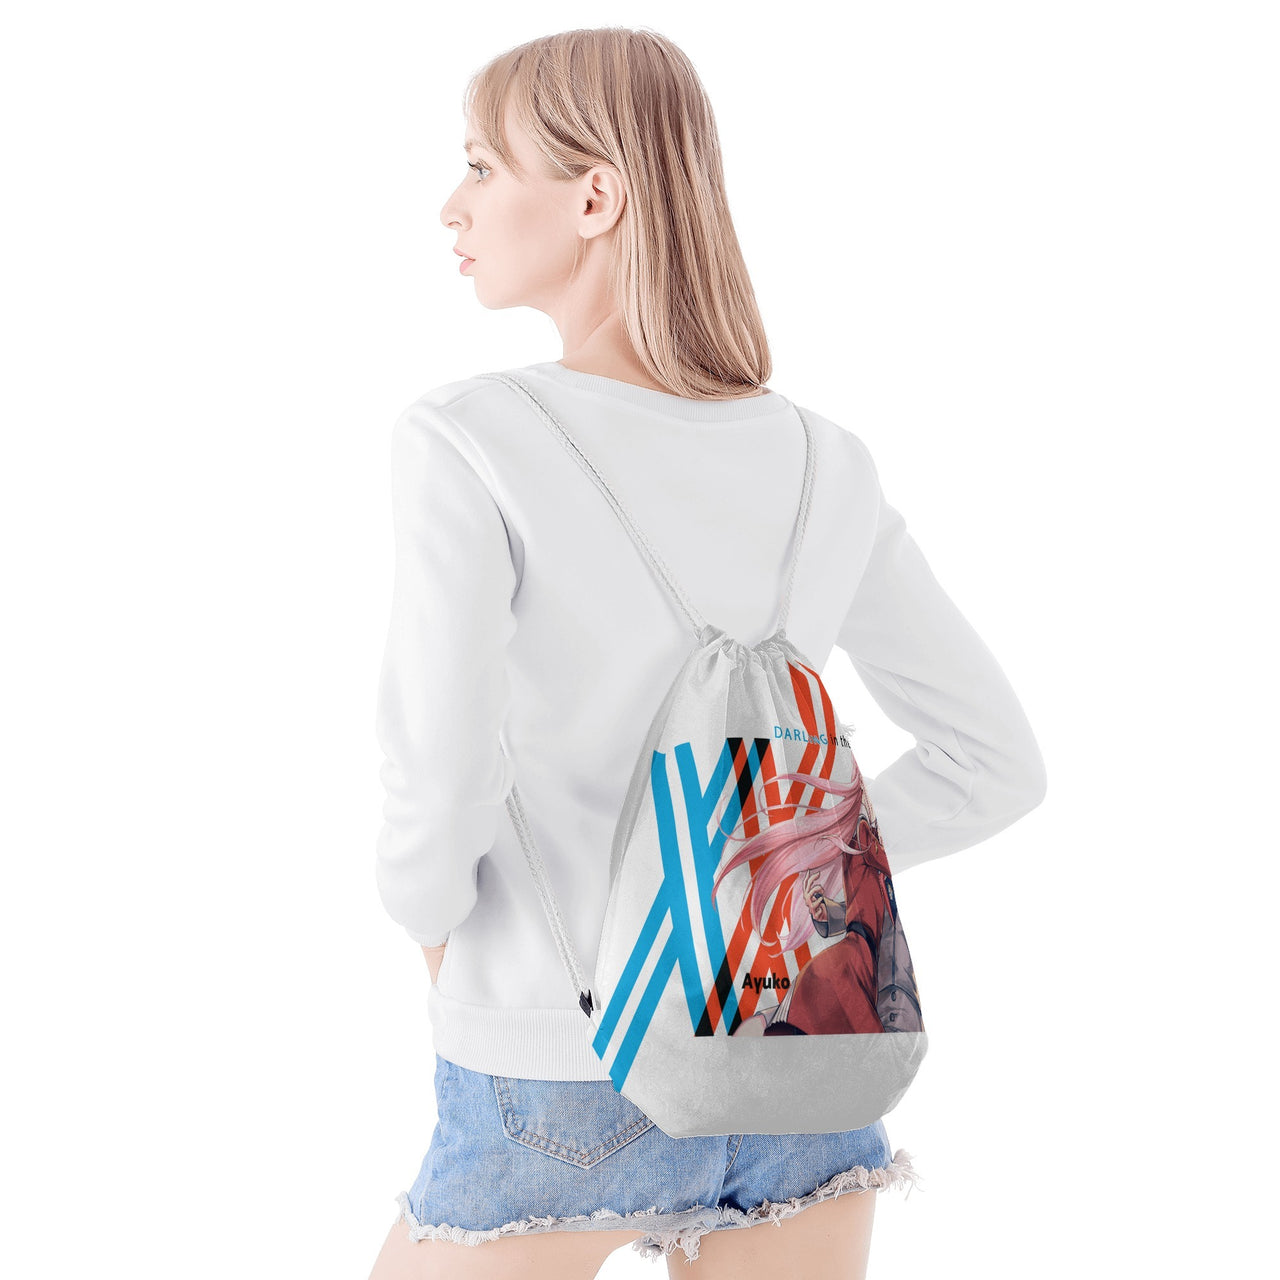 Borsa con coulisse Darling in the Franxx anime